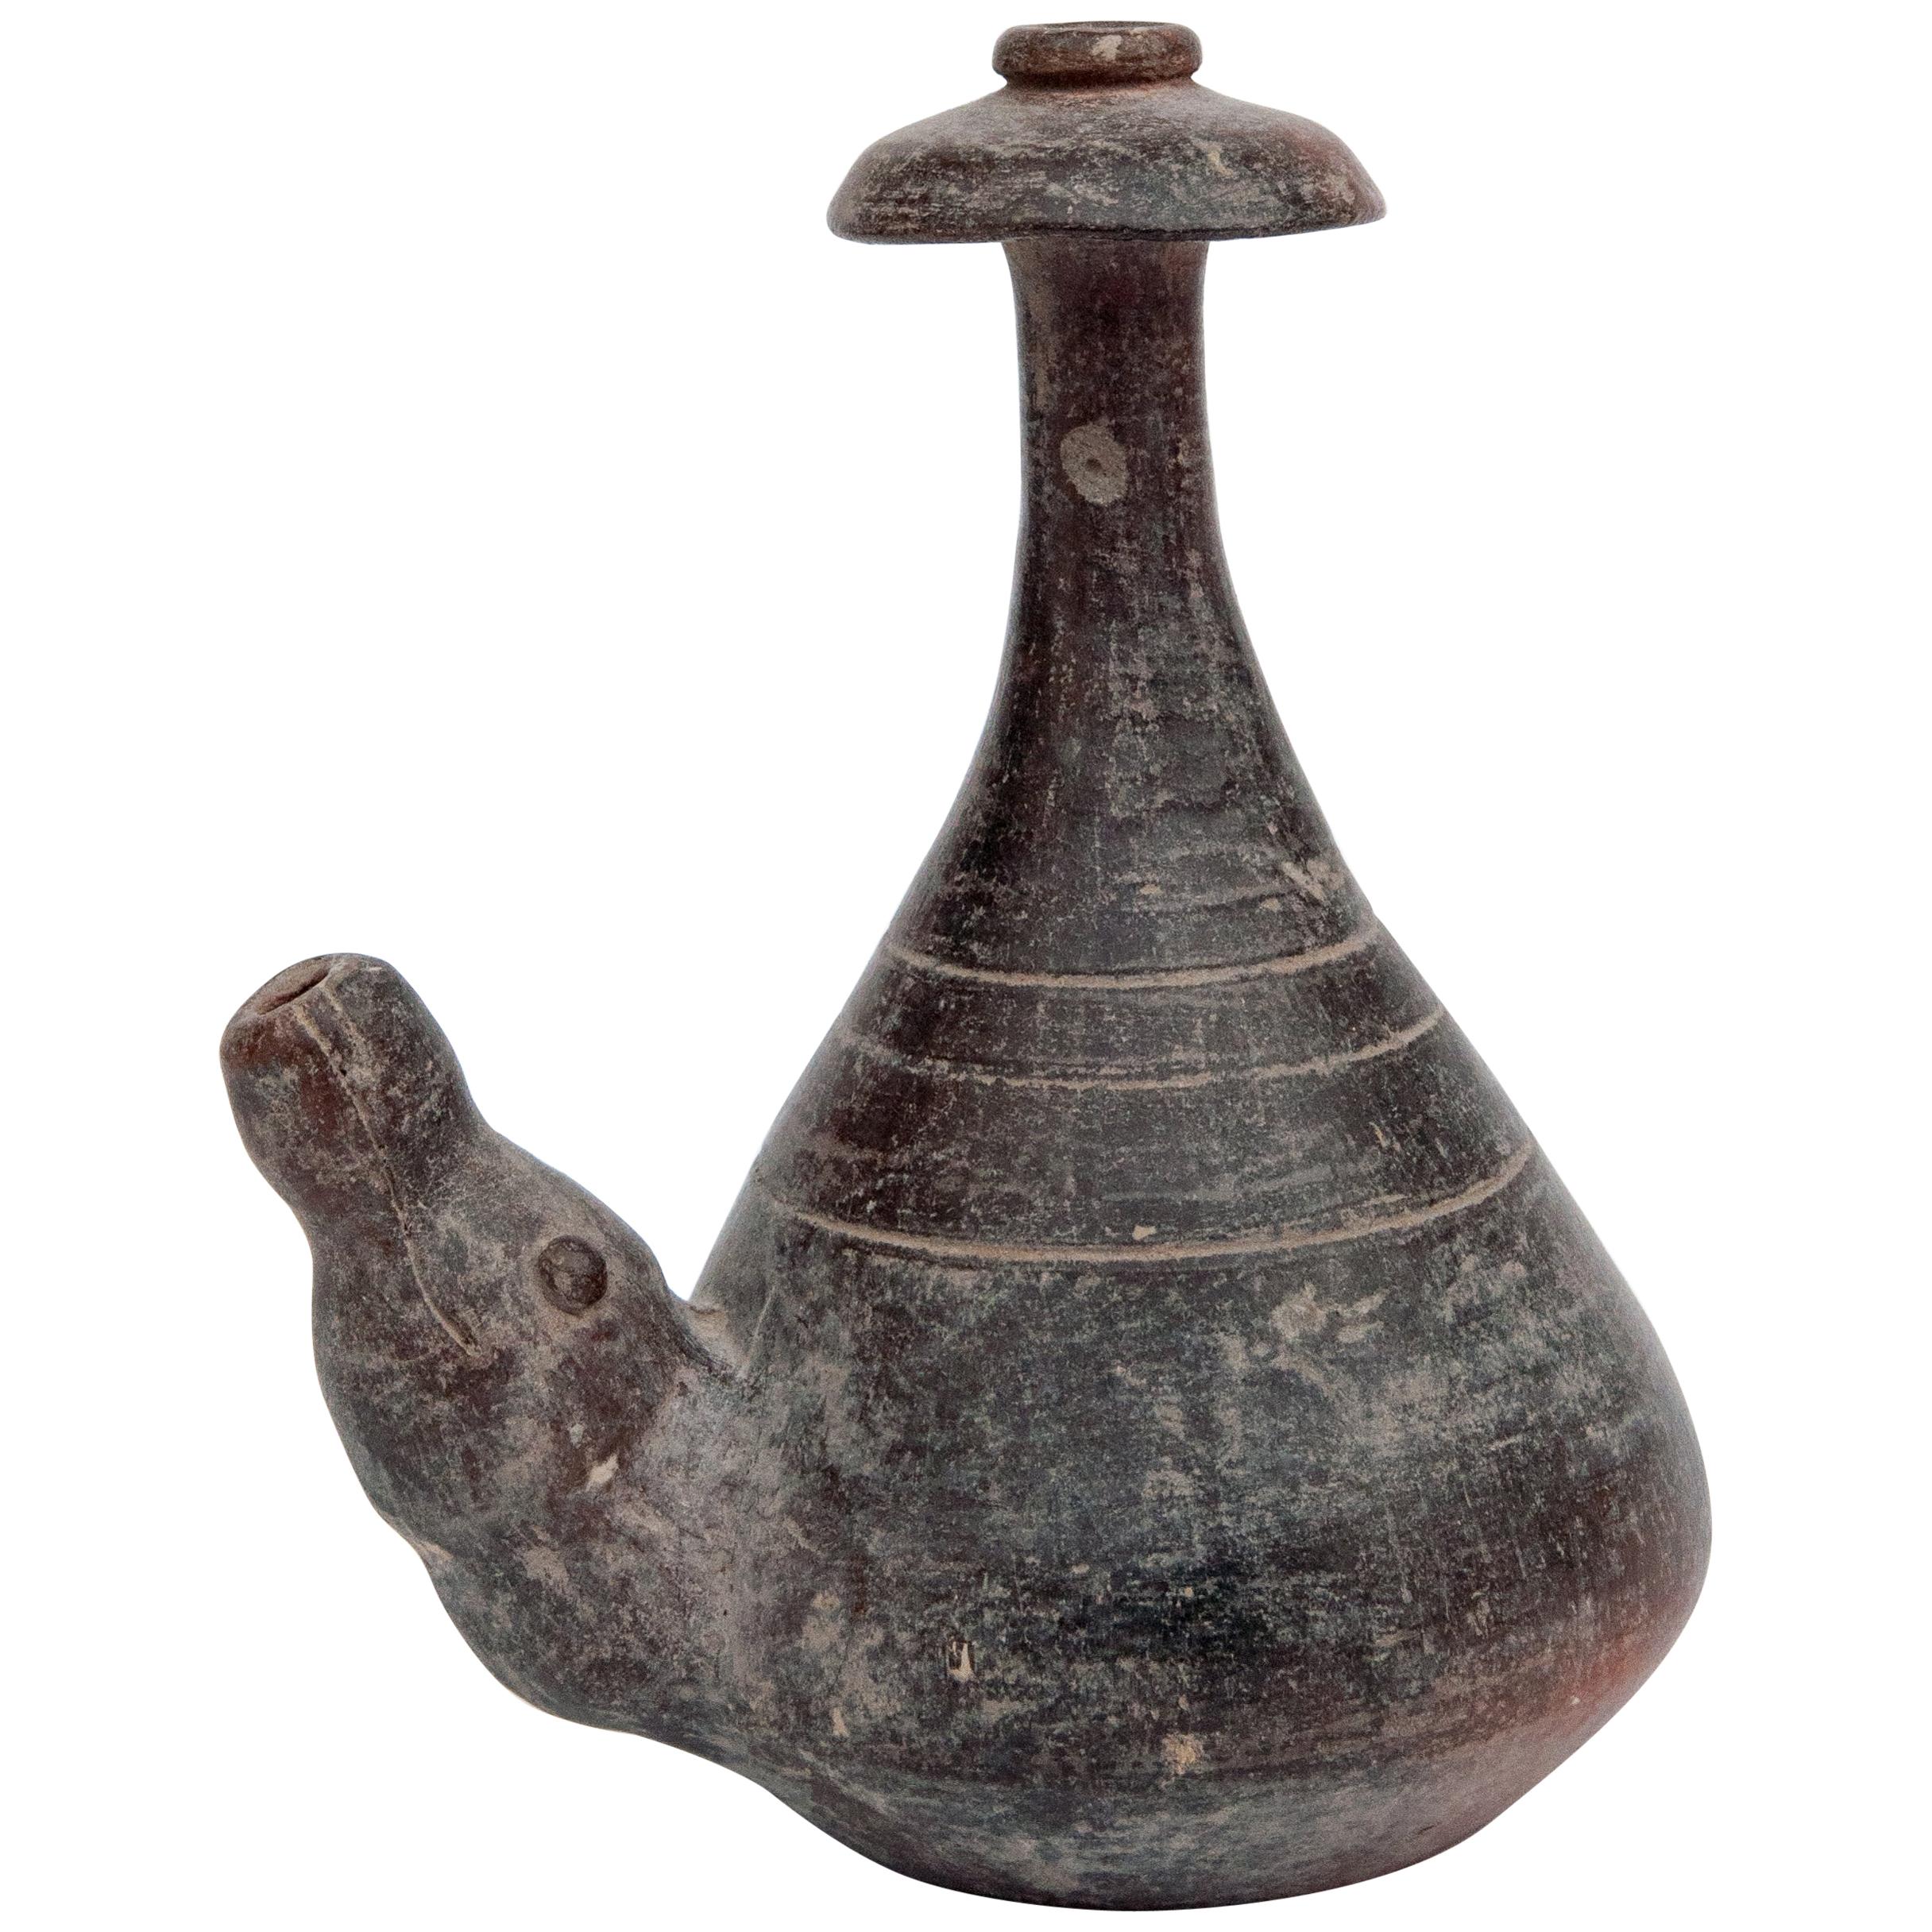 Old Earthenware Kendi, Majapahit Style, North or East Java, Late 19th Century